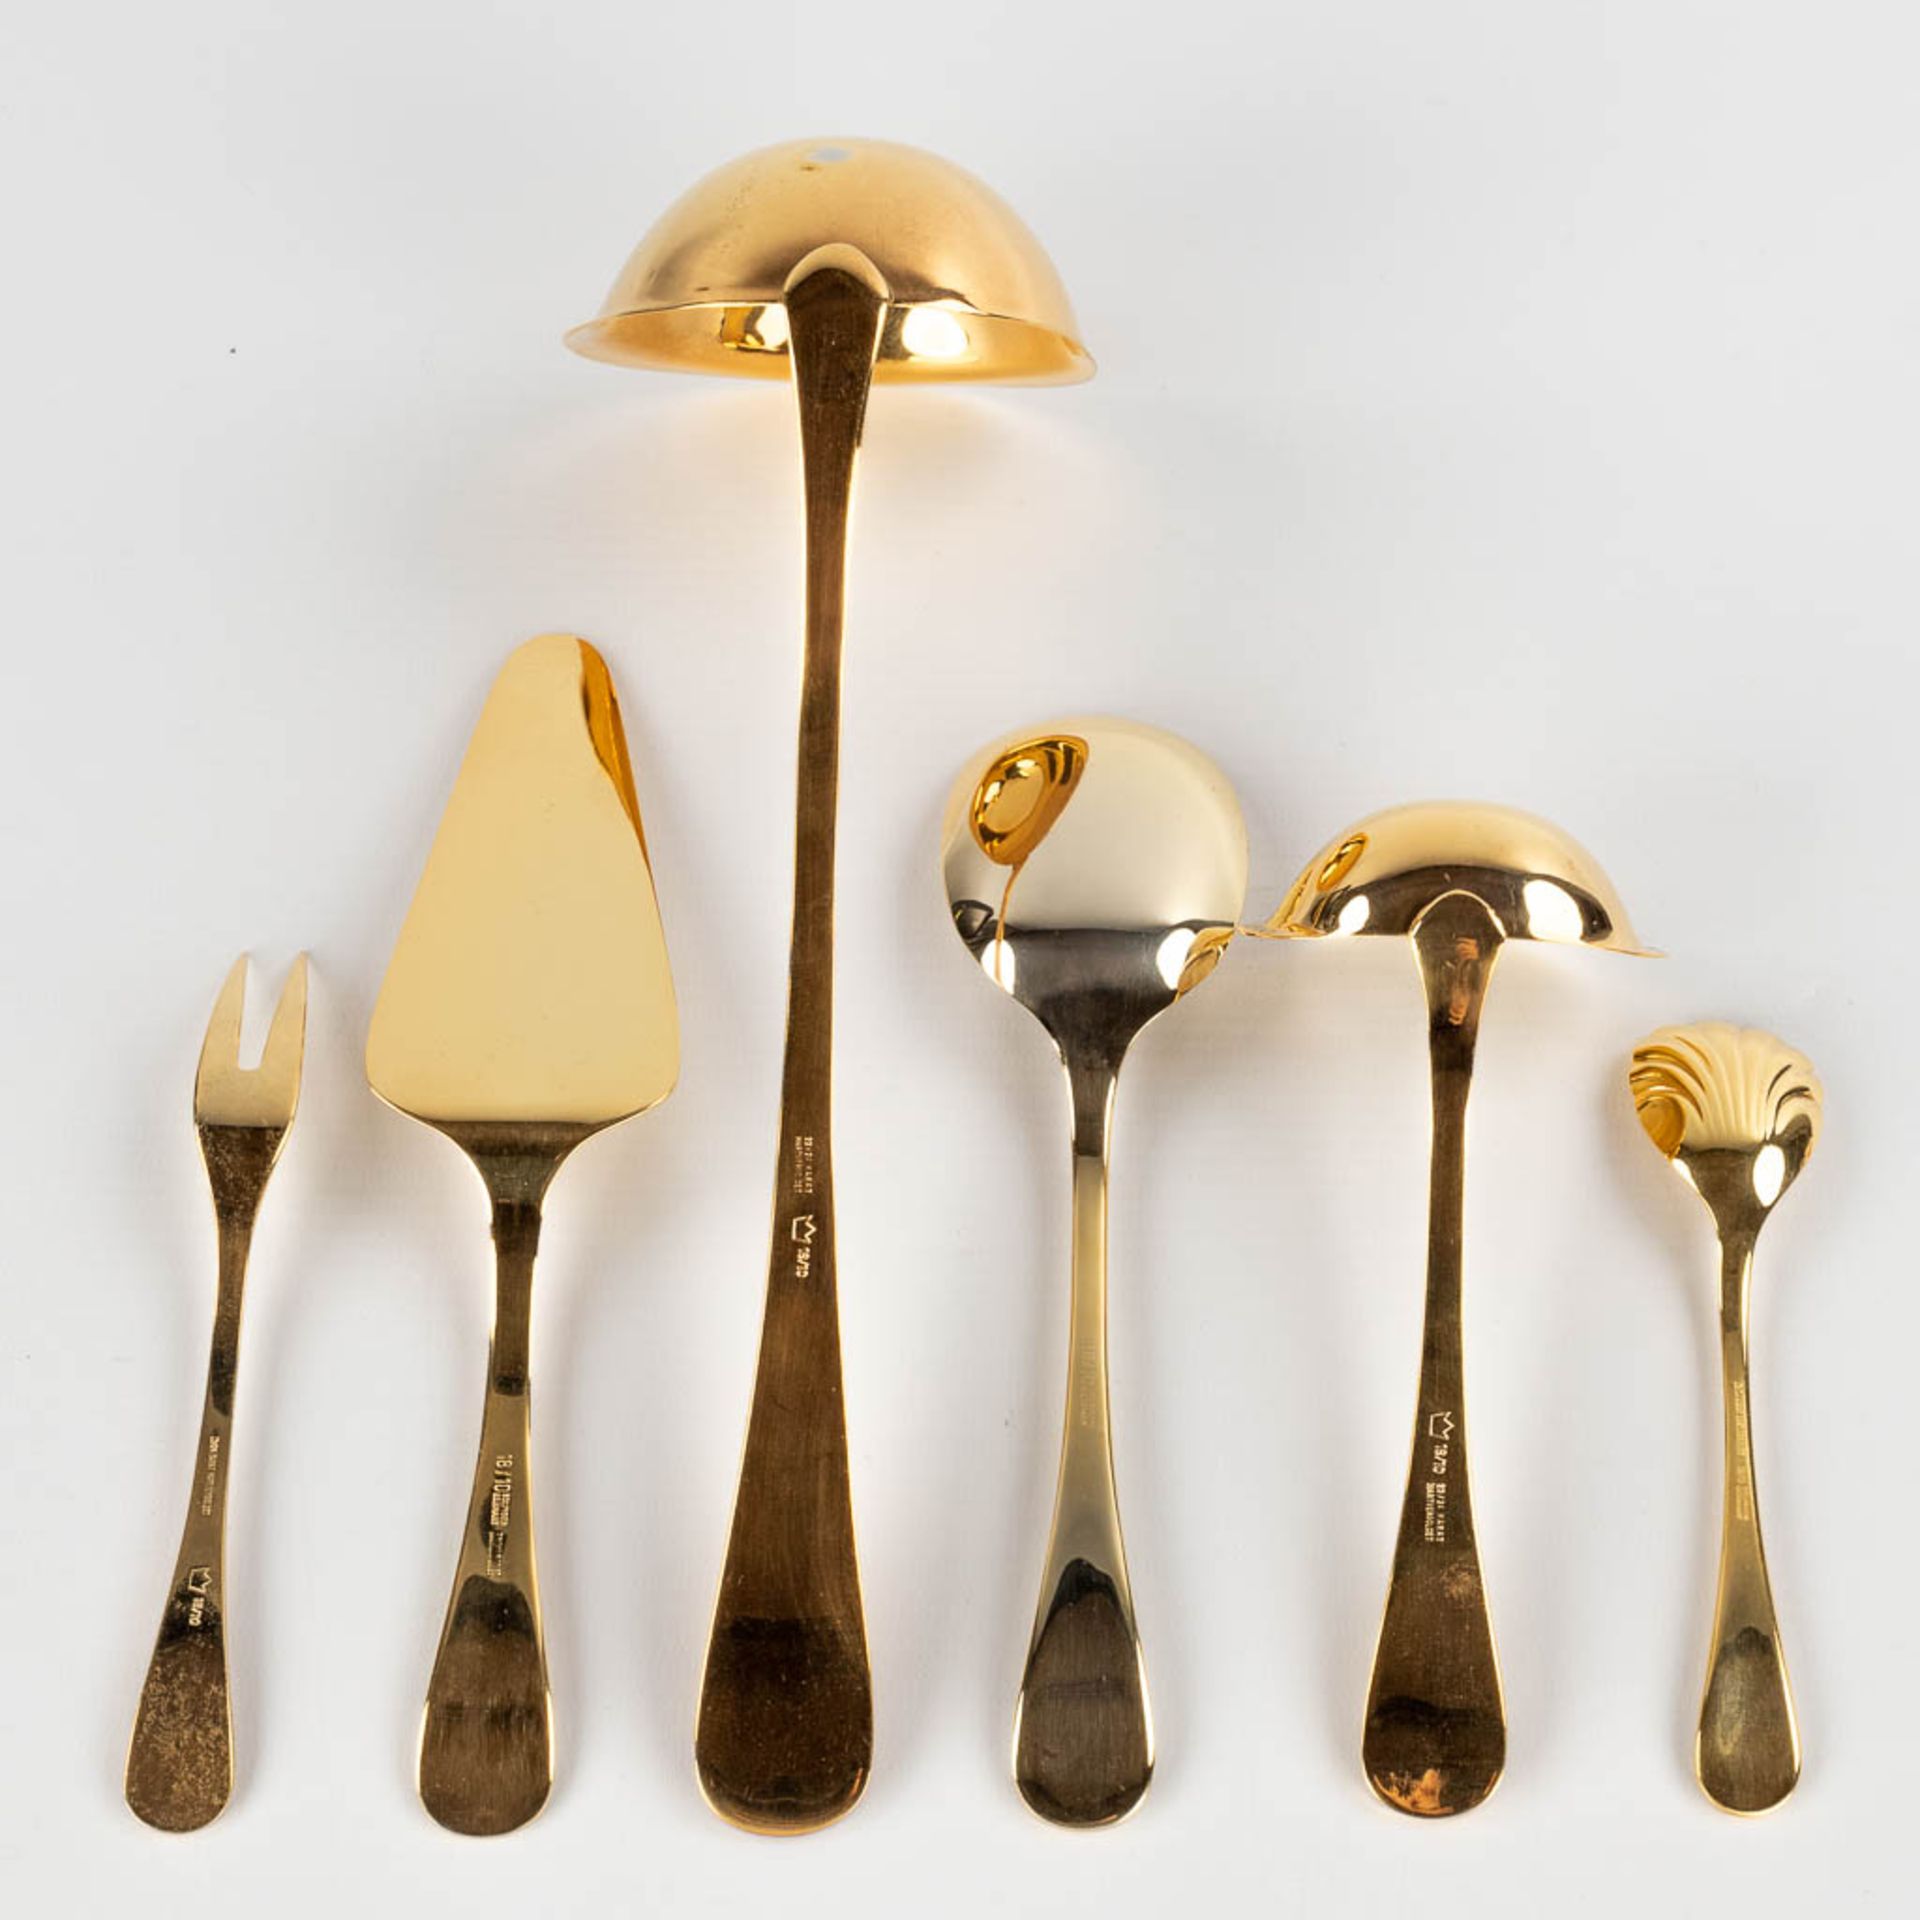 A gold-plated 'Royal Collection Solingen' flatware cutlery set, made in Germany. Model 'Perles' (D:3 - Image 8 of 14